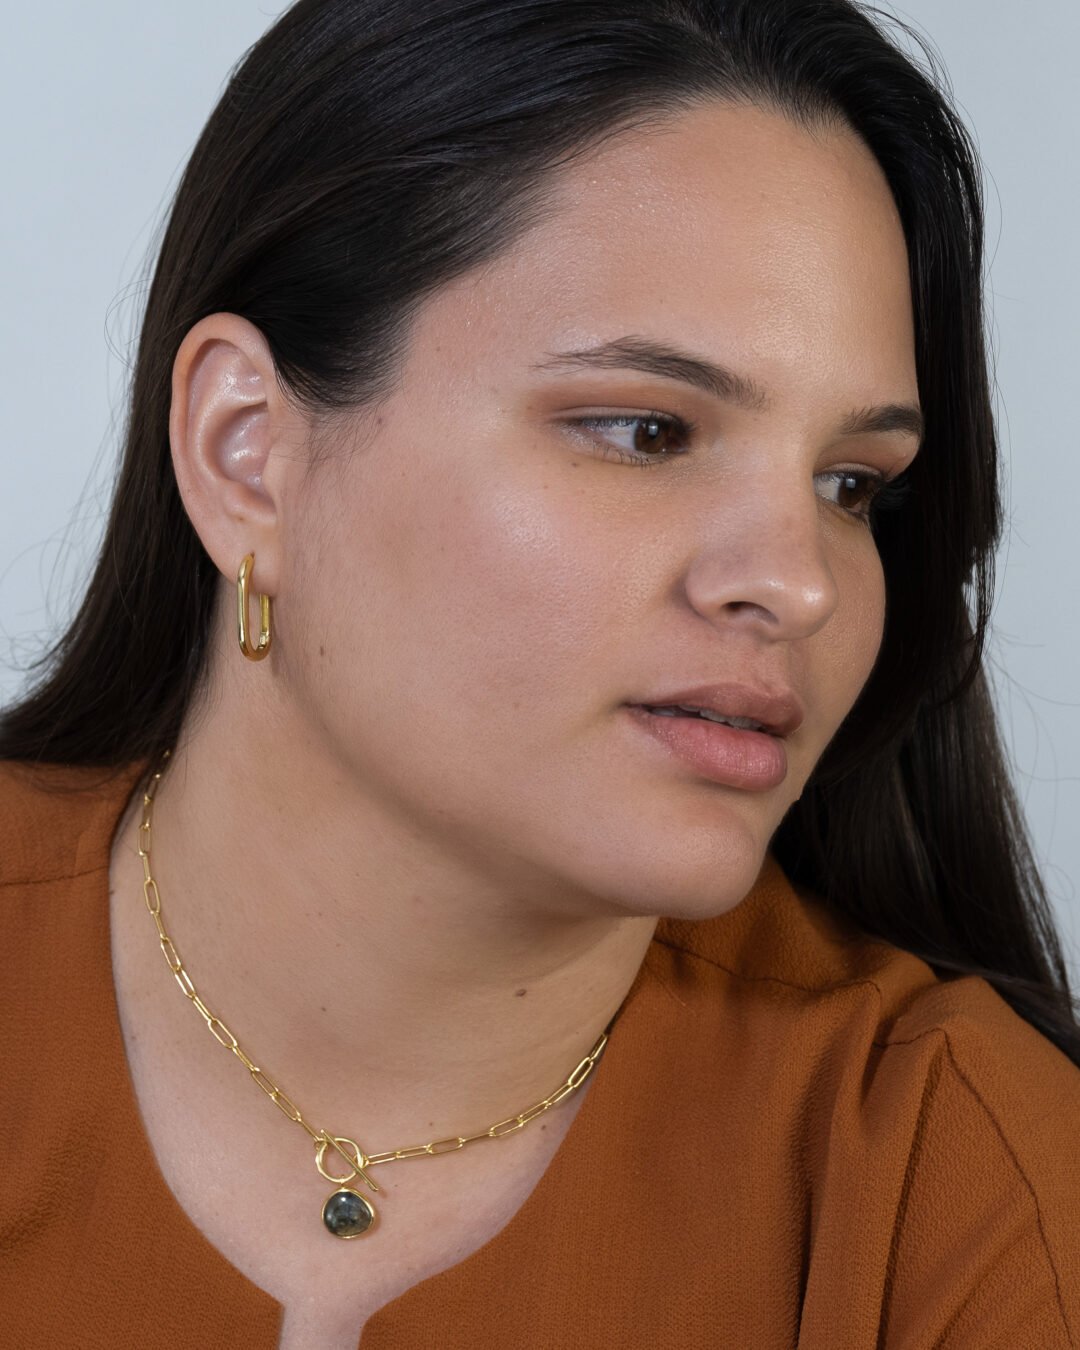 clip earrings and opal necklace